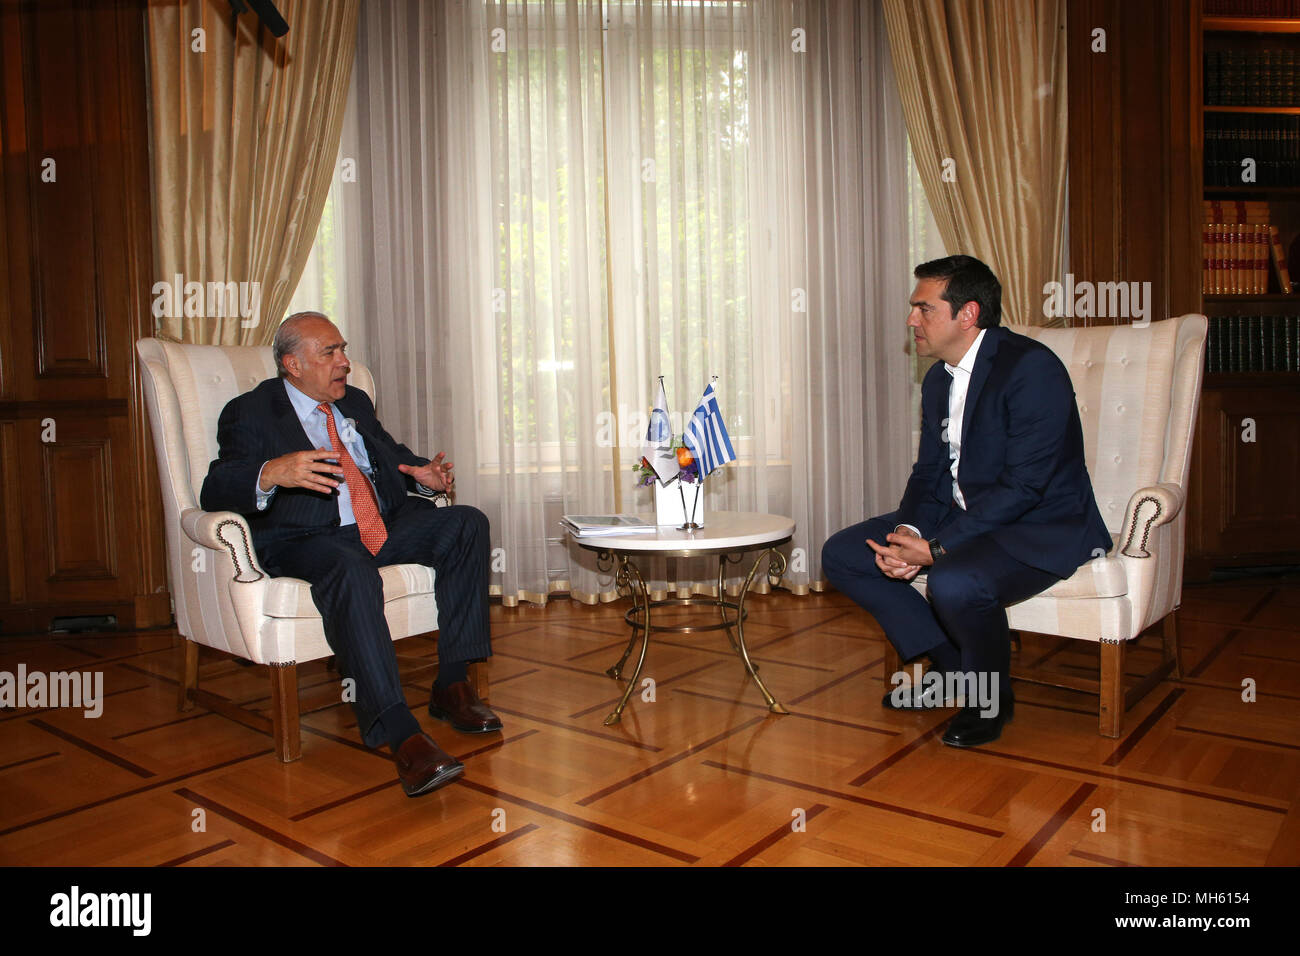 (180430) -- ATHENS, April 30, 2018 (Xinhua) -- Greek Prime Minister Alexis Tsipras (R) meets with Secretary-General of the Organization for Economic Cooperation and Development (OECD) Angel Gurria at the Prime Minister office in Athens, Greece, on April 30, 2018. The time has come for further Greek debt relief, Angel Gurria said here on Monday after meeting with Alexis Tsipras. (Xinhua/Marios Lolos) Stock Photo